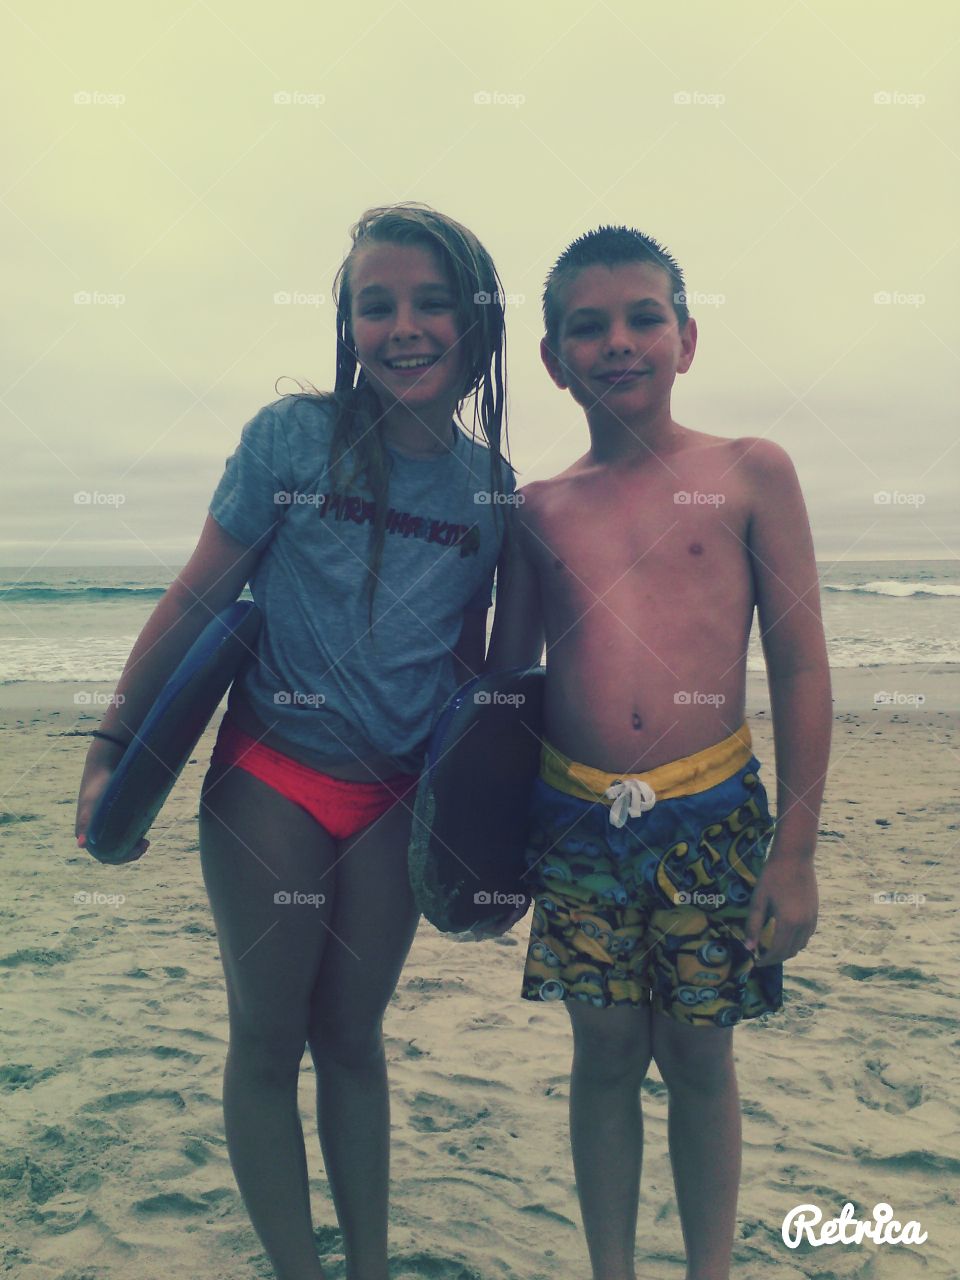 body surfing in Oceanside. the kids had a blast with their little boogie boards, catching the waves, it was a fun day.